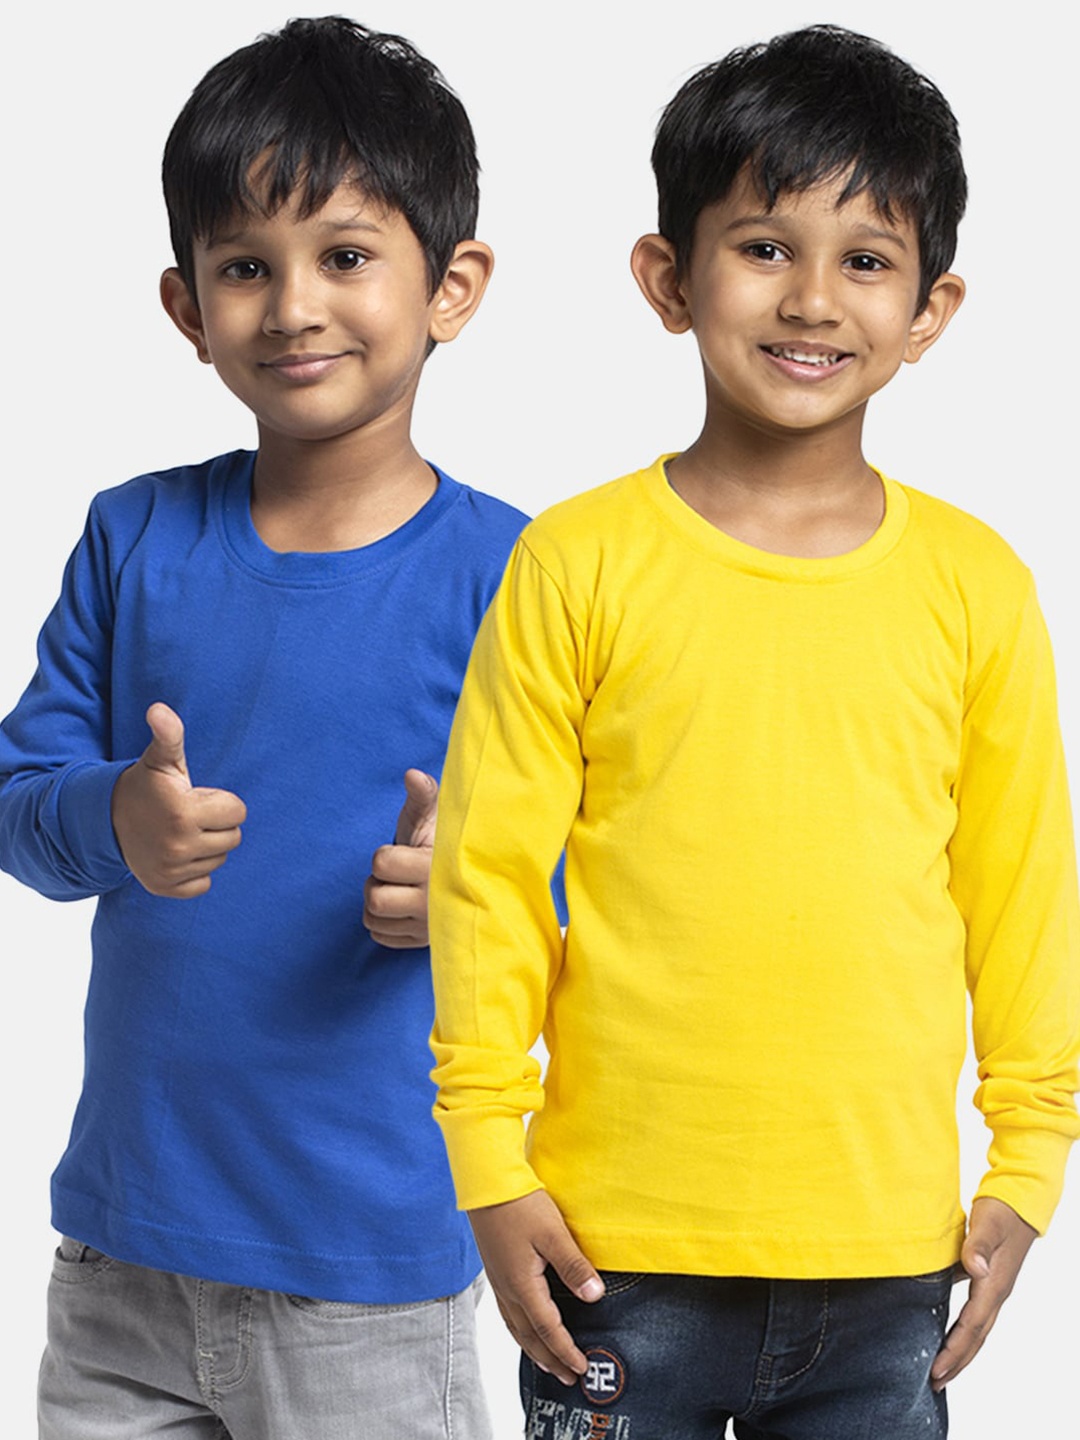 

Friskers Boys Pack Of 2 Pure Cotton T-shirts, Blue